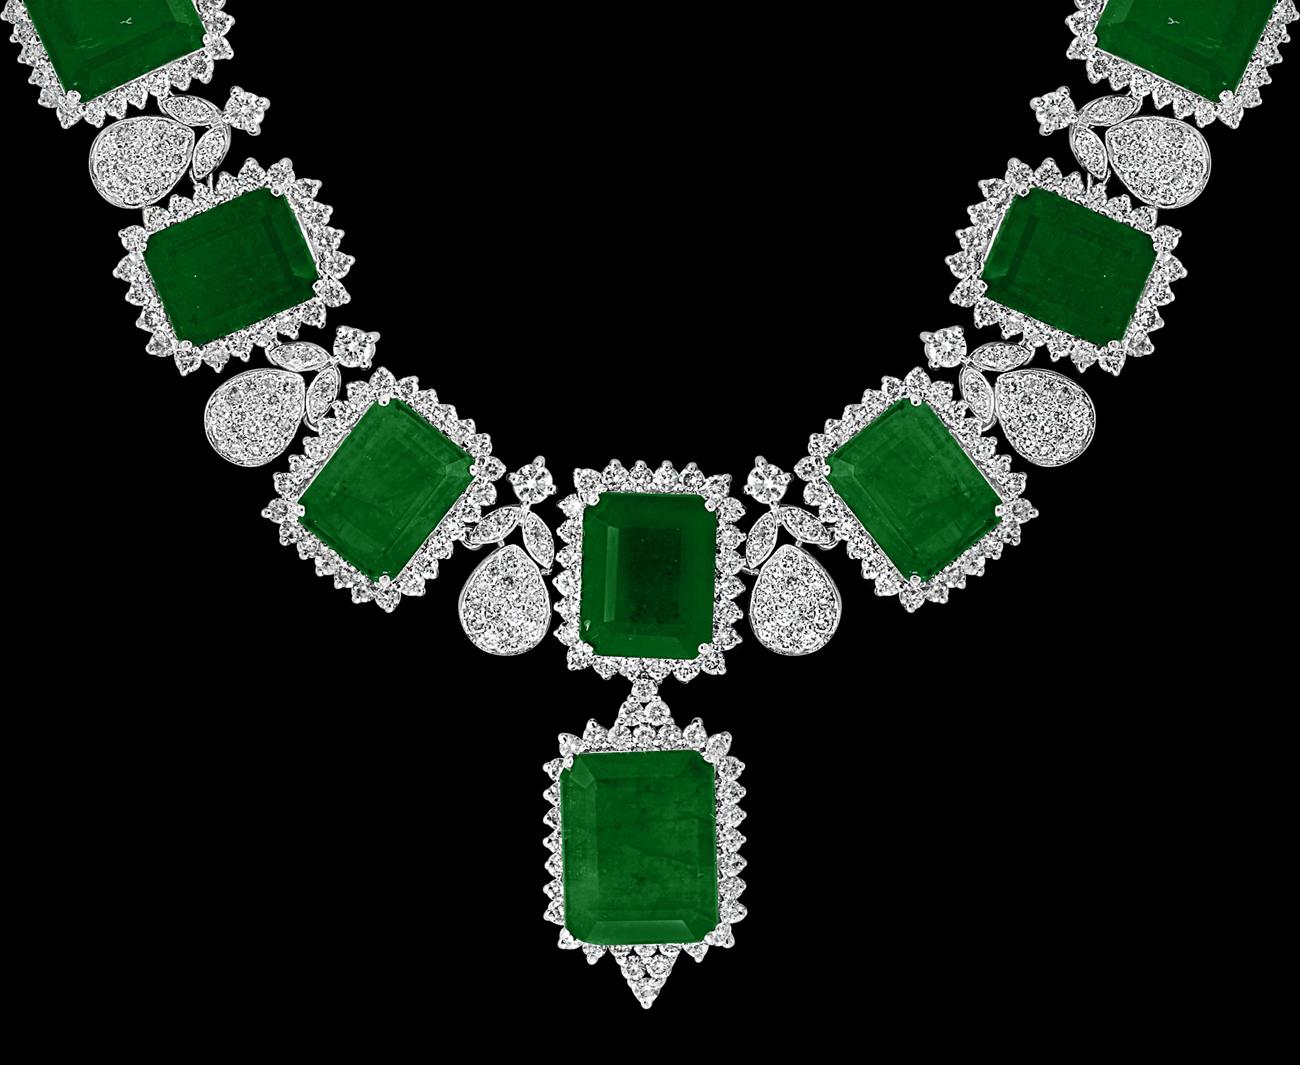  GIA Certified 135 Ct  Emerald Cut  Emerald and 28.50  Ct Diamond Necklace and Earring  Bridal  Suite.
Emeralds are Brazilian and Natural 
Two Random stones were certified 
The first stone is the drop of the necklace in the middle 
Natural Beryl
GIA